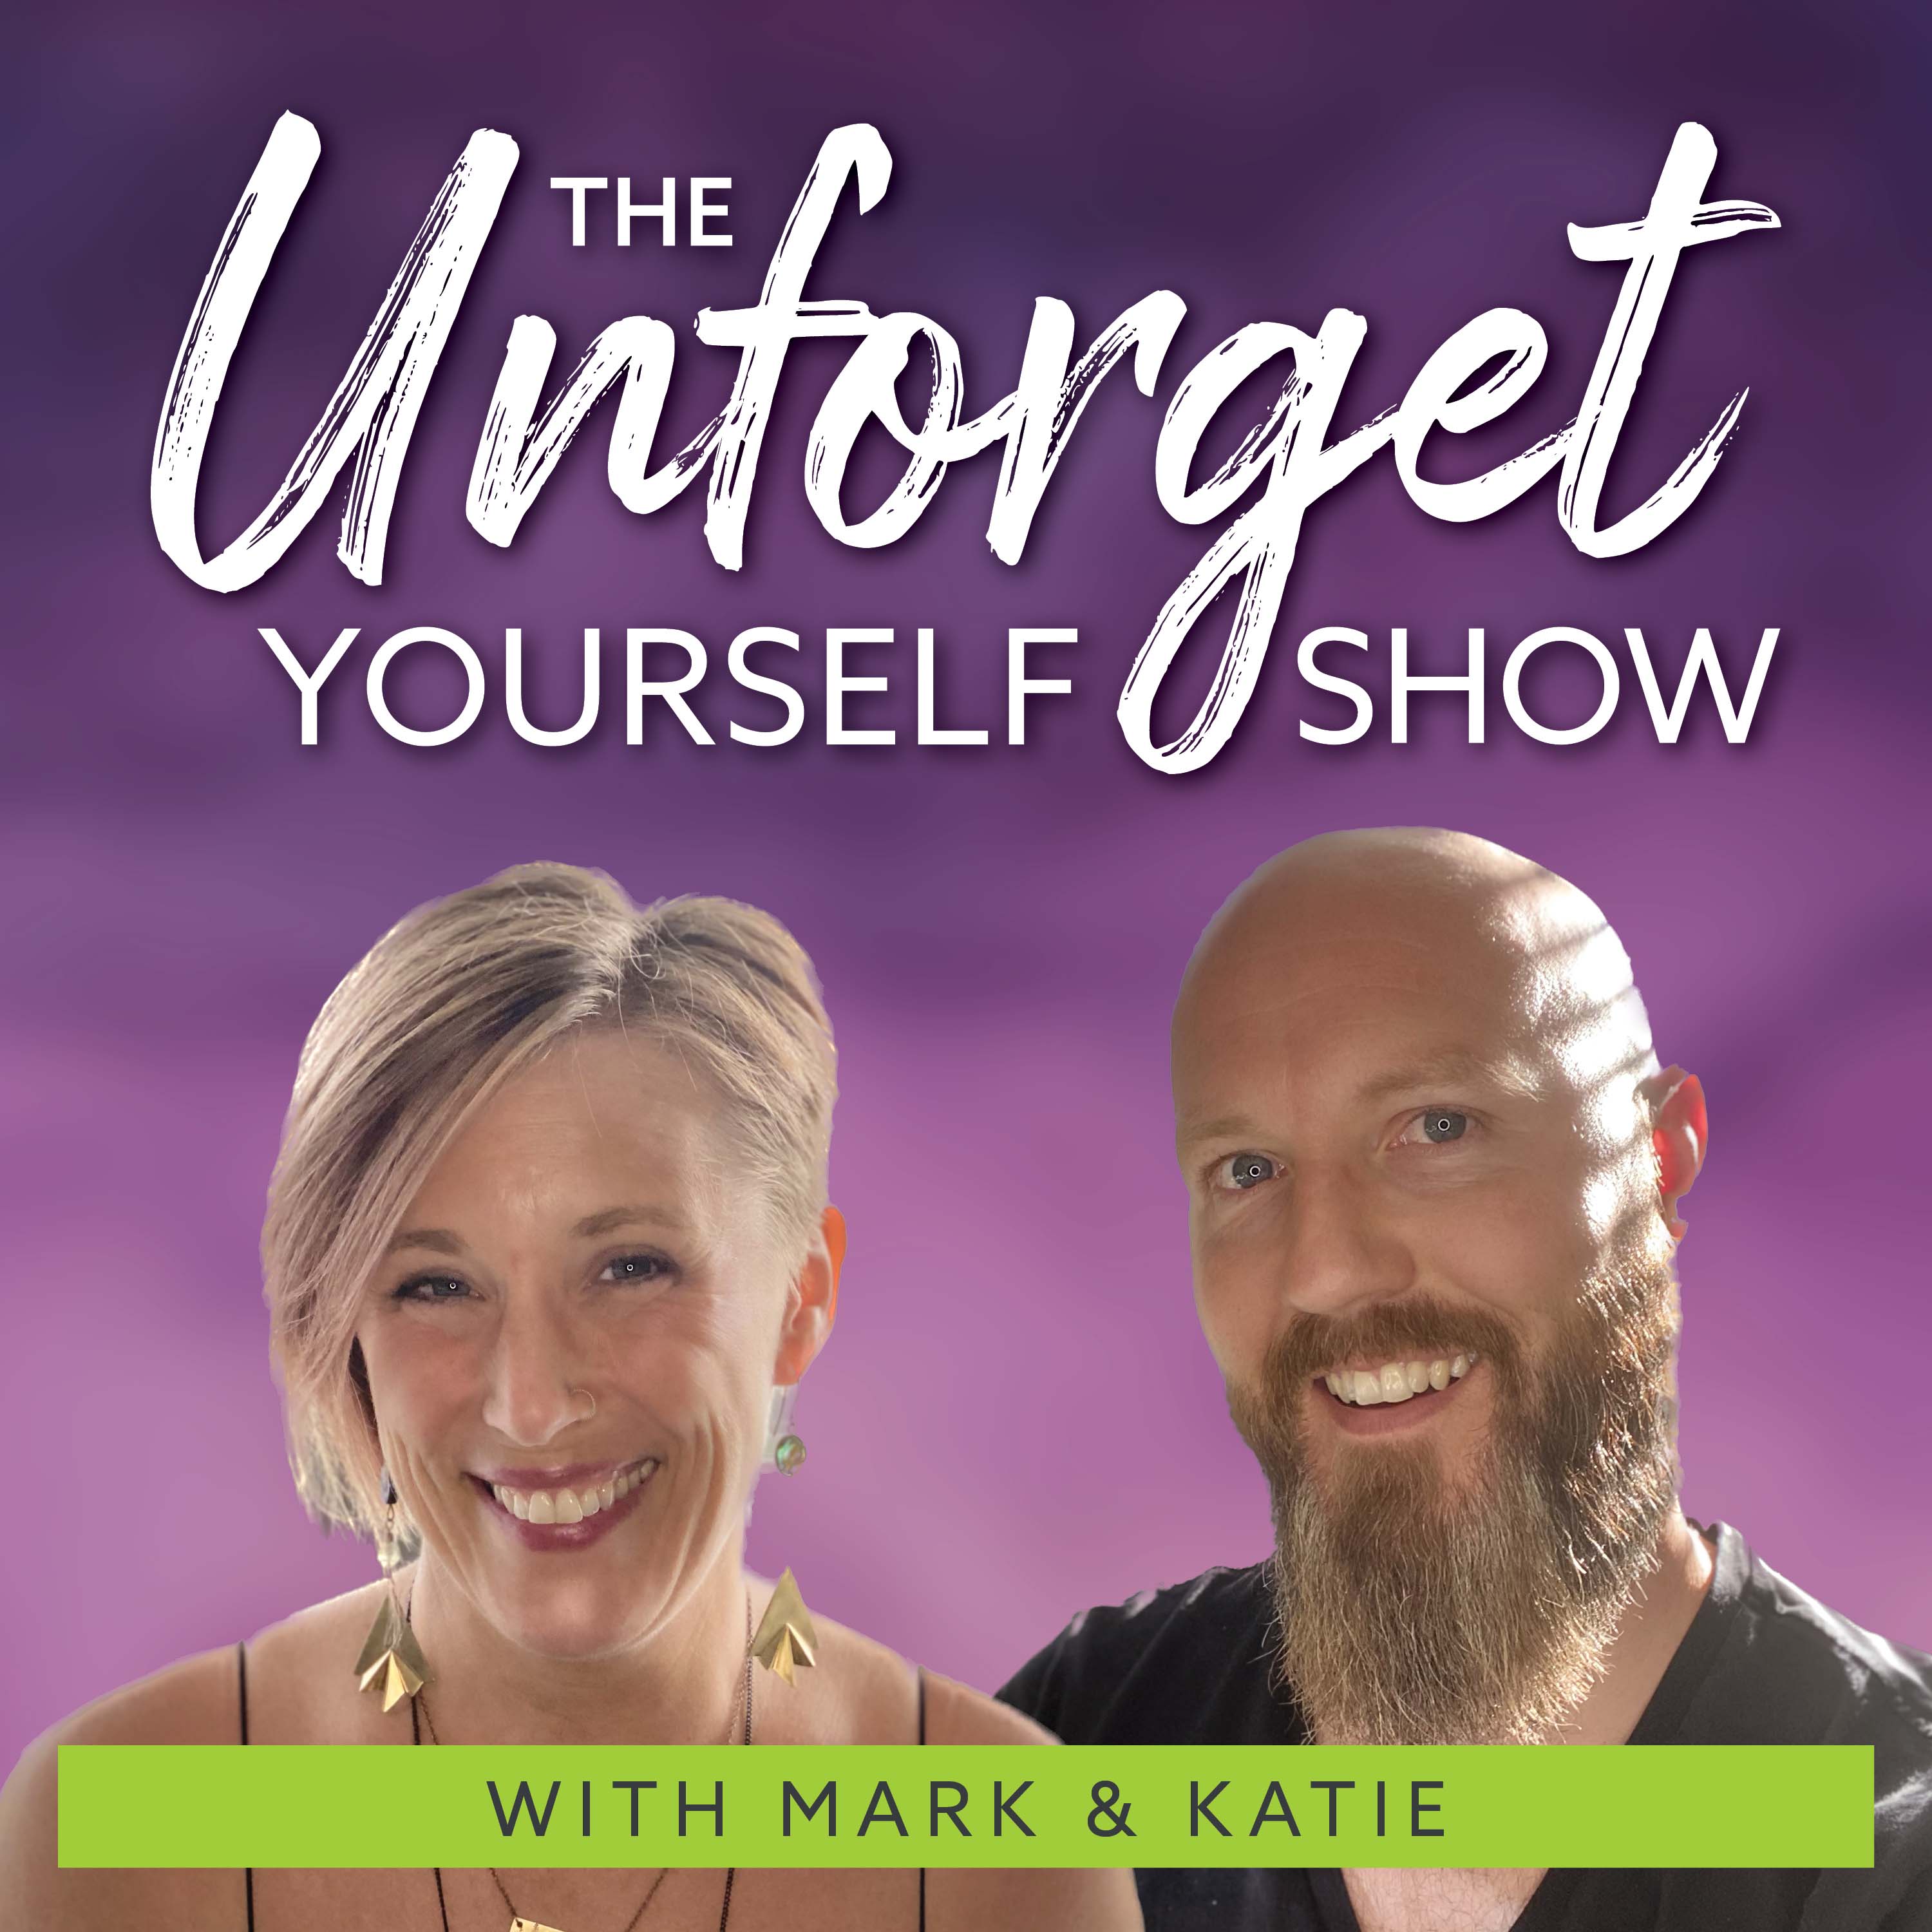 The Unforget Yourself Show